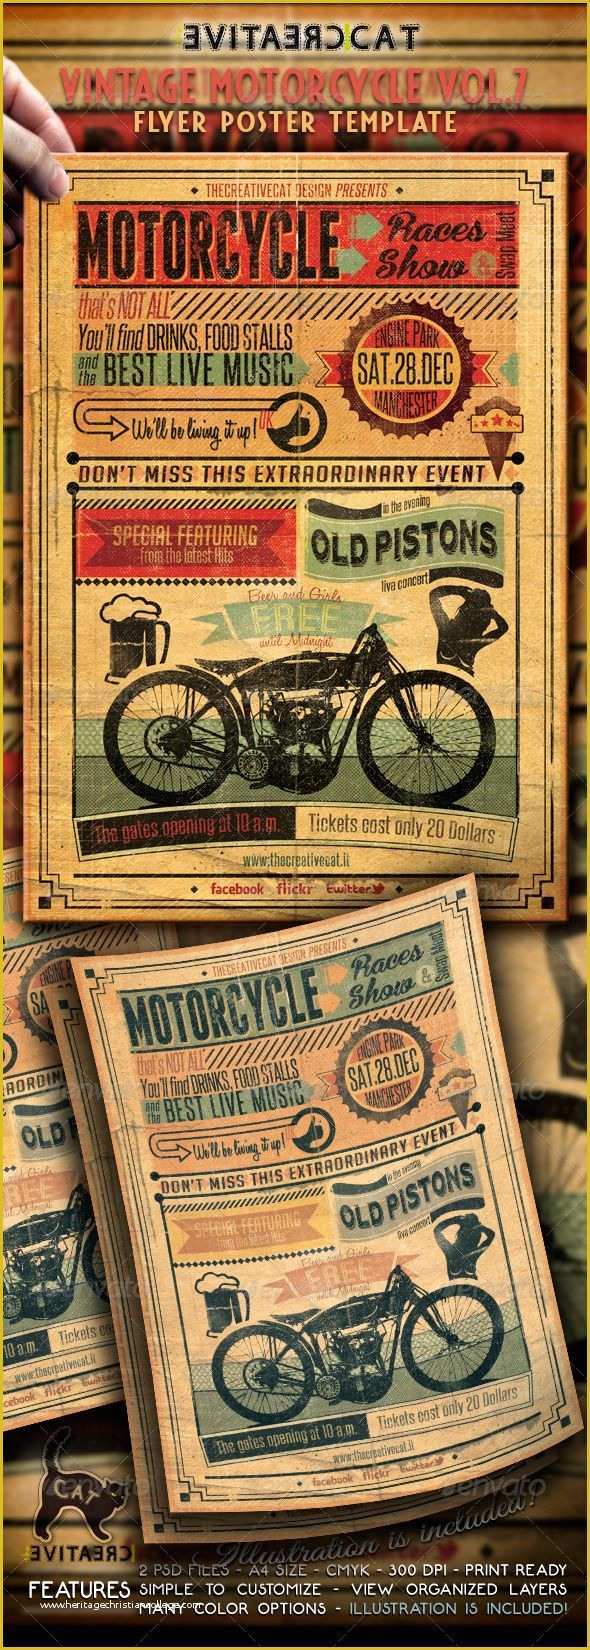 Free Motorcycle Ride Flyer Template Of Vintage Motorcycle Flyer Poster Vol 7